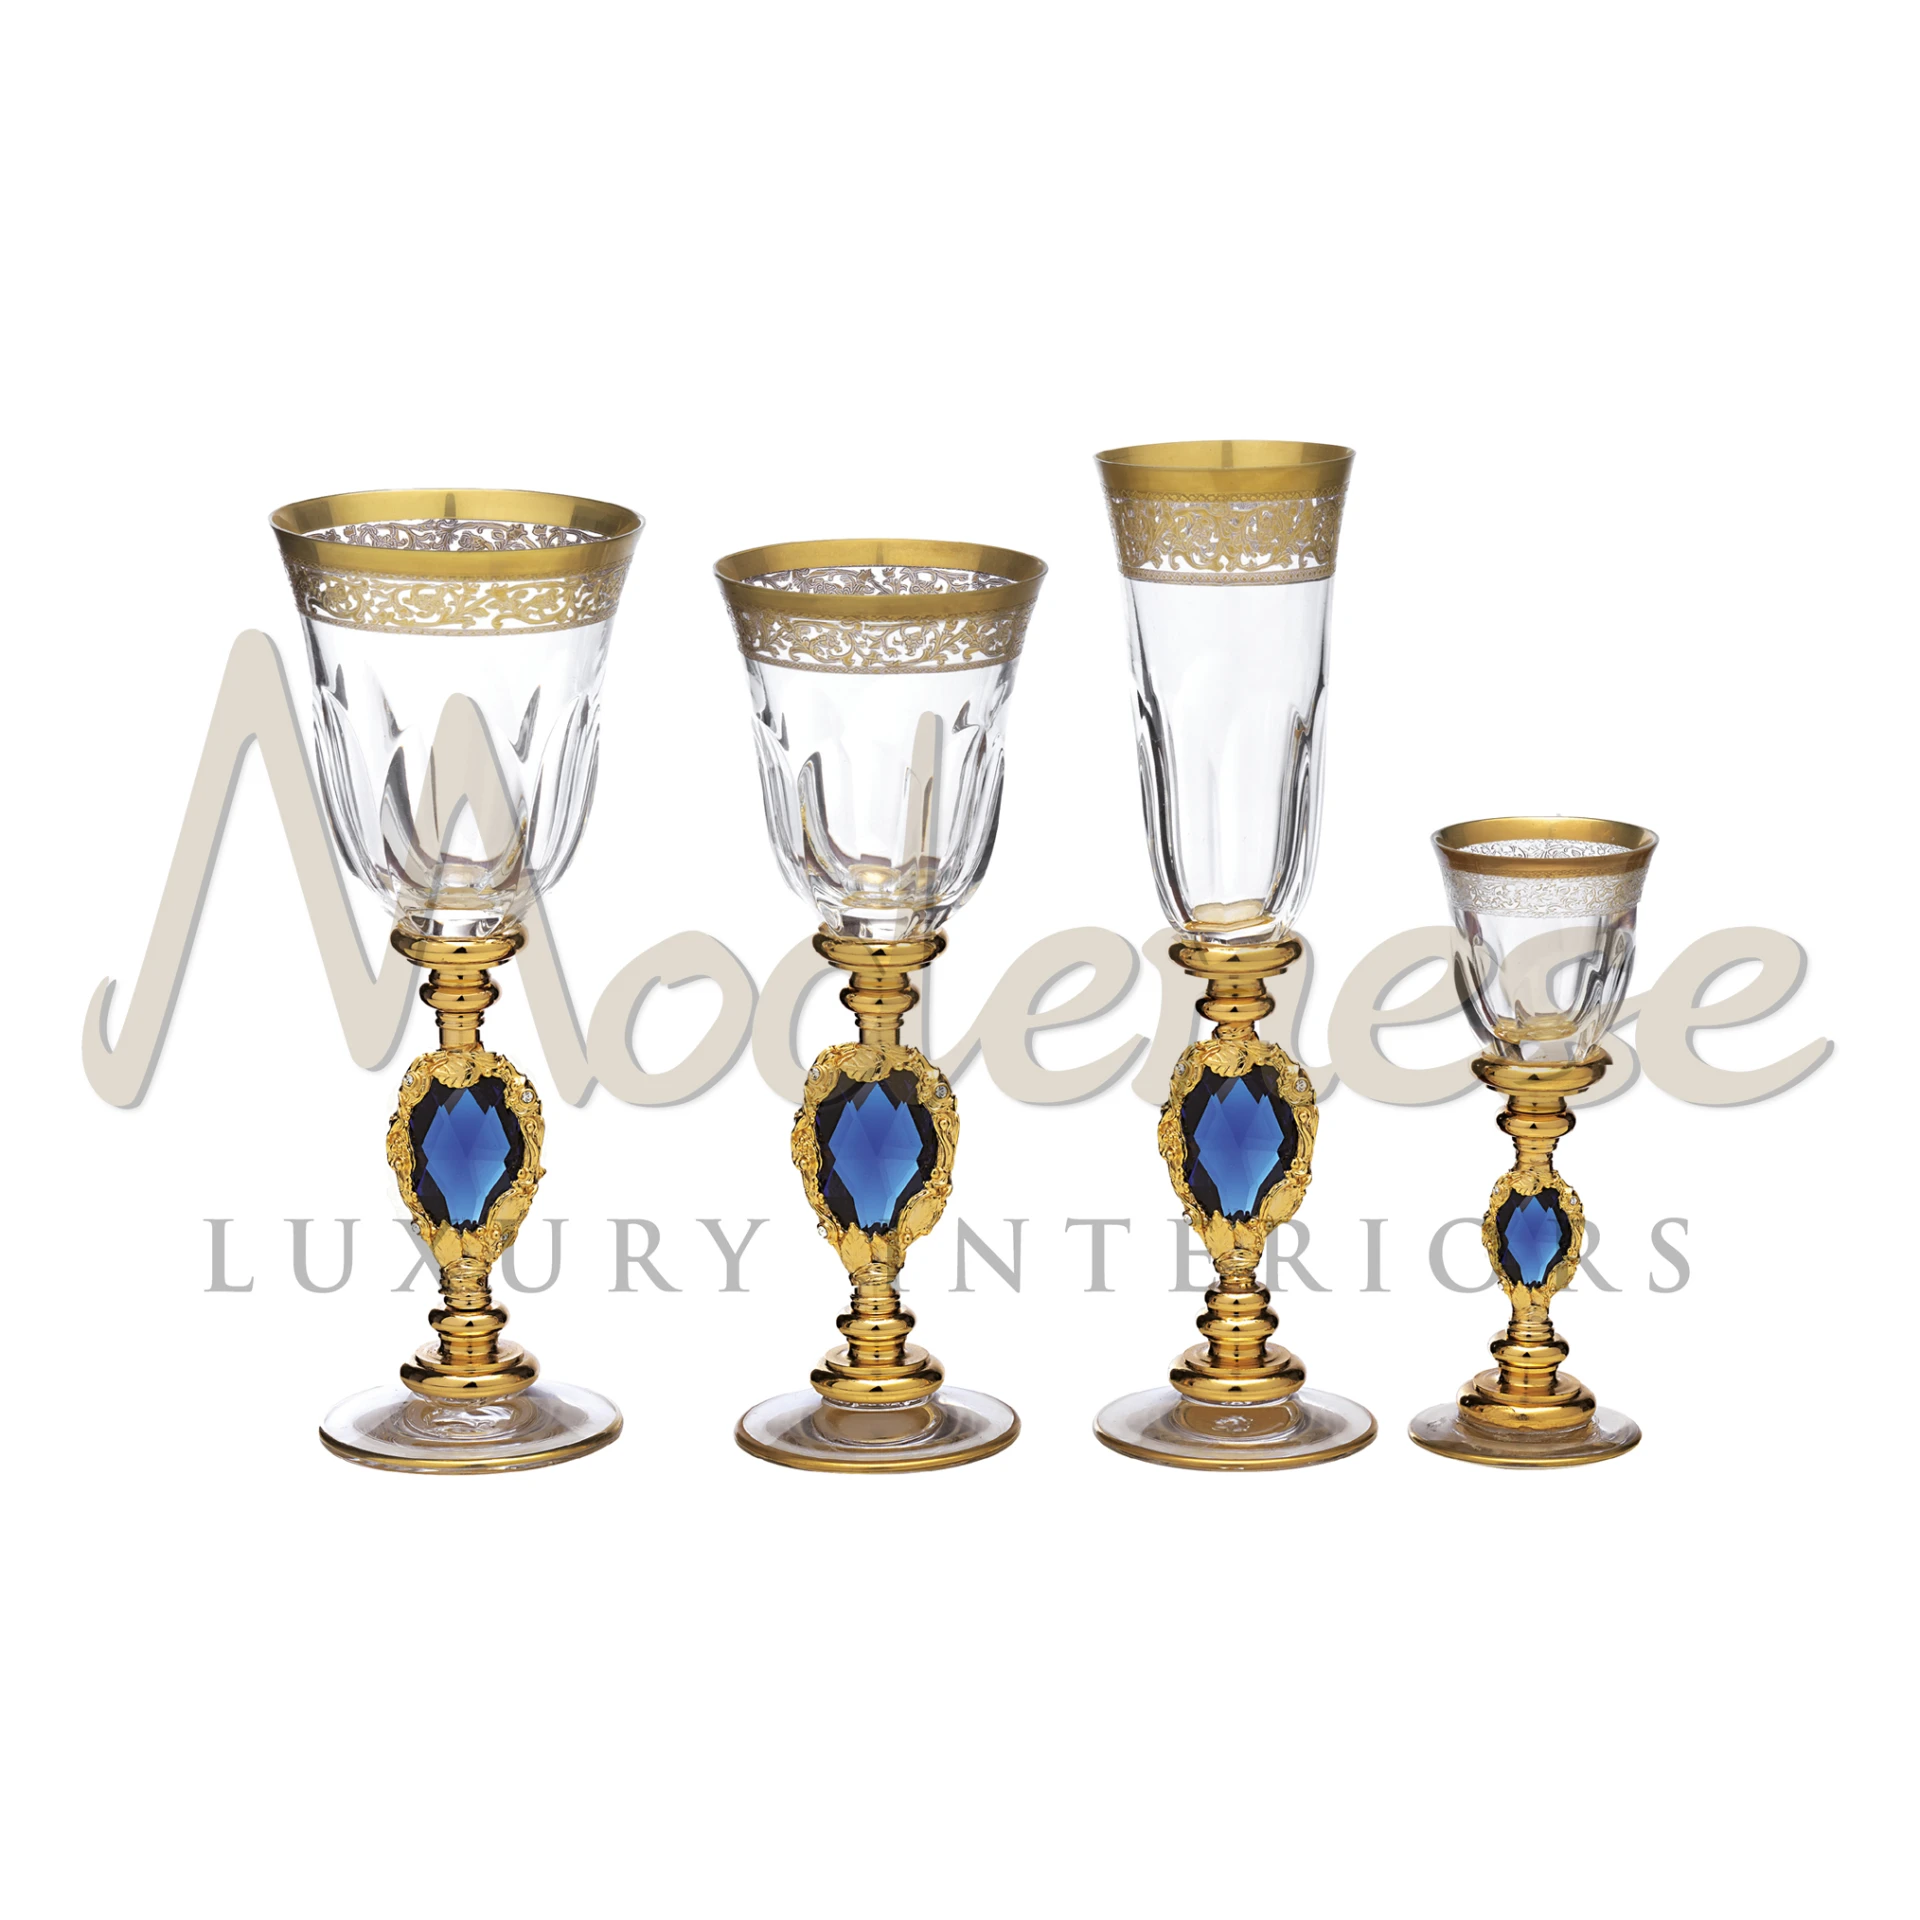 Stylish 'Blue Crystal' glassware set with gold accents and prominent blue gemstone